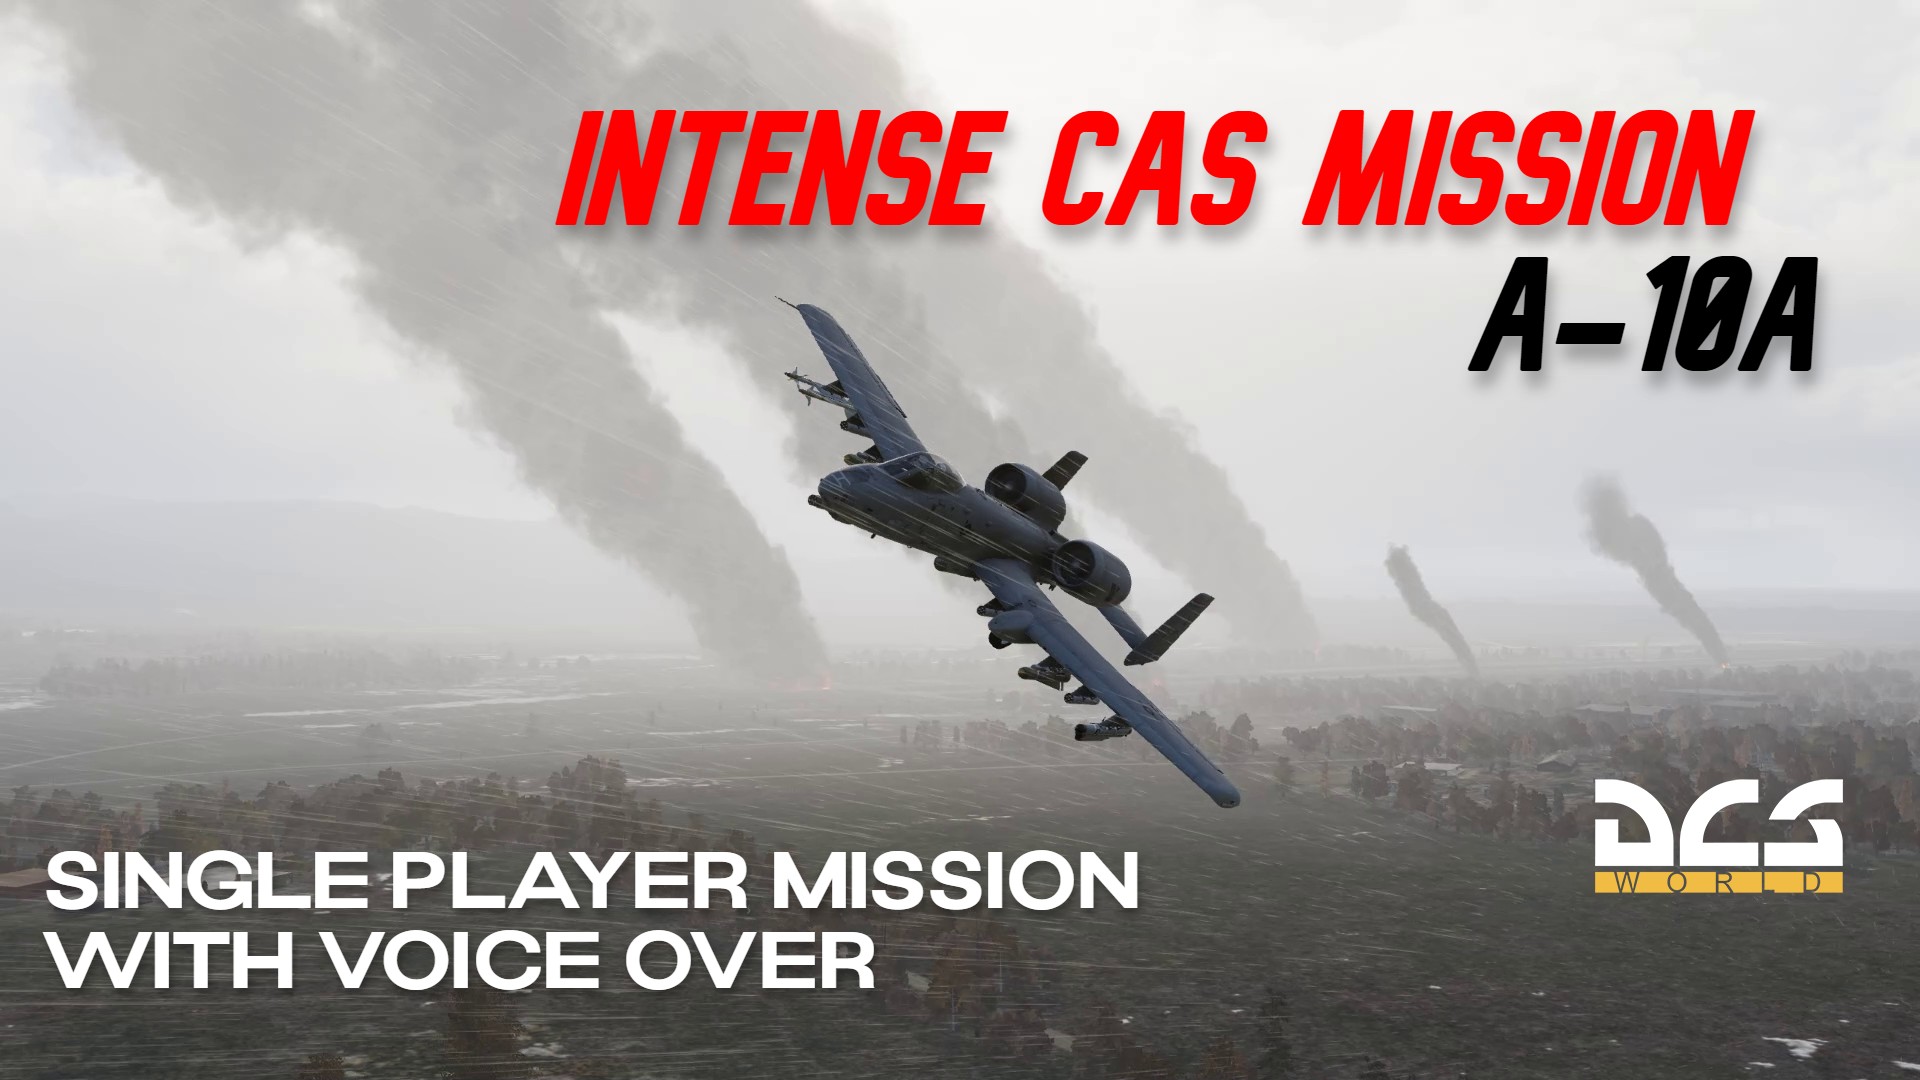 A-10a Intense CAS mission (with voice over)